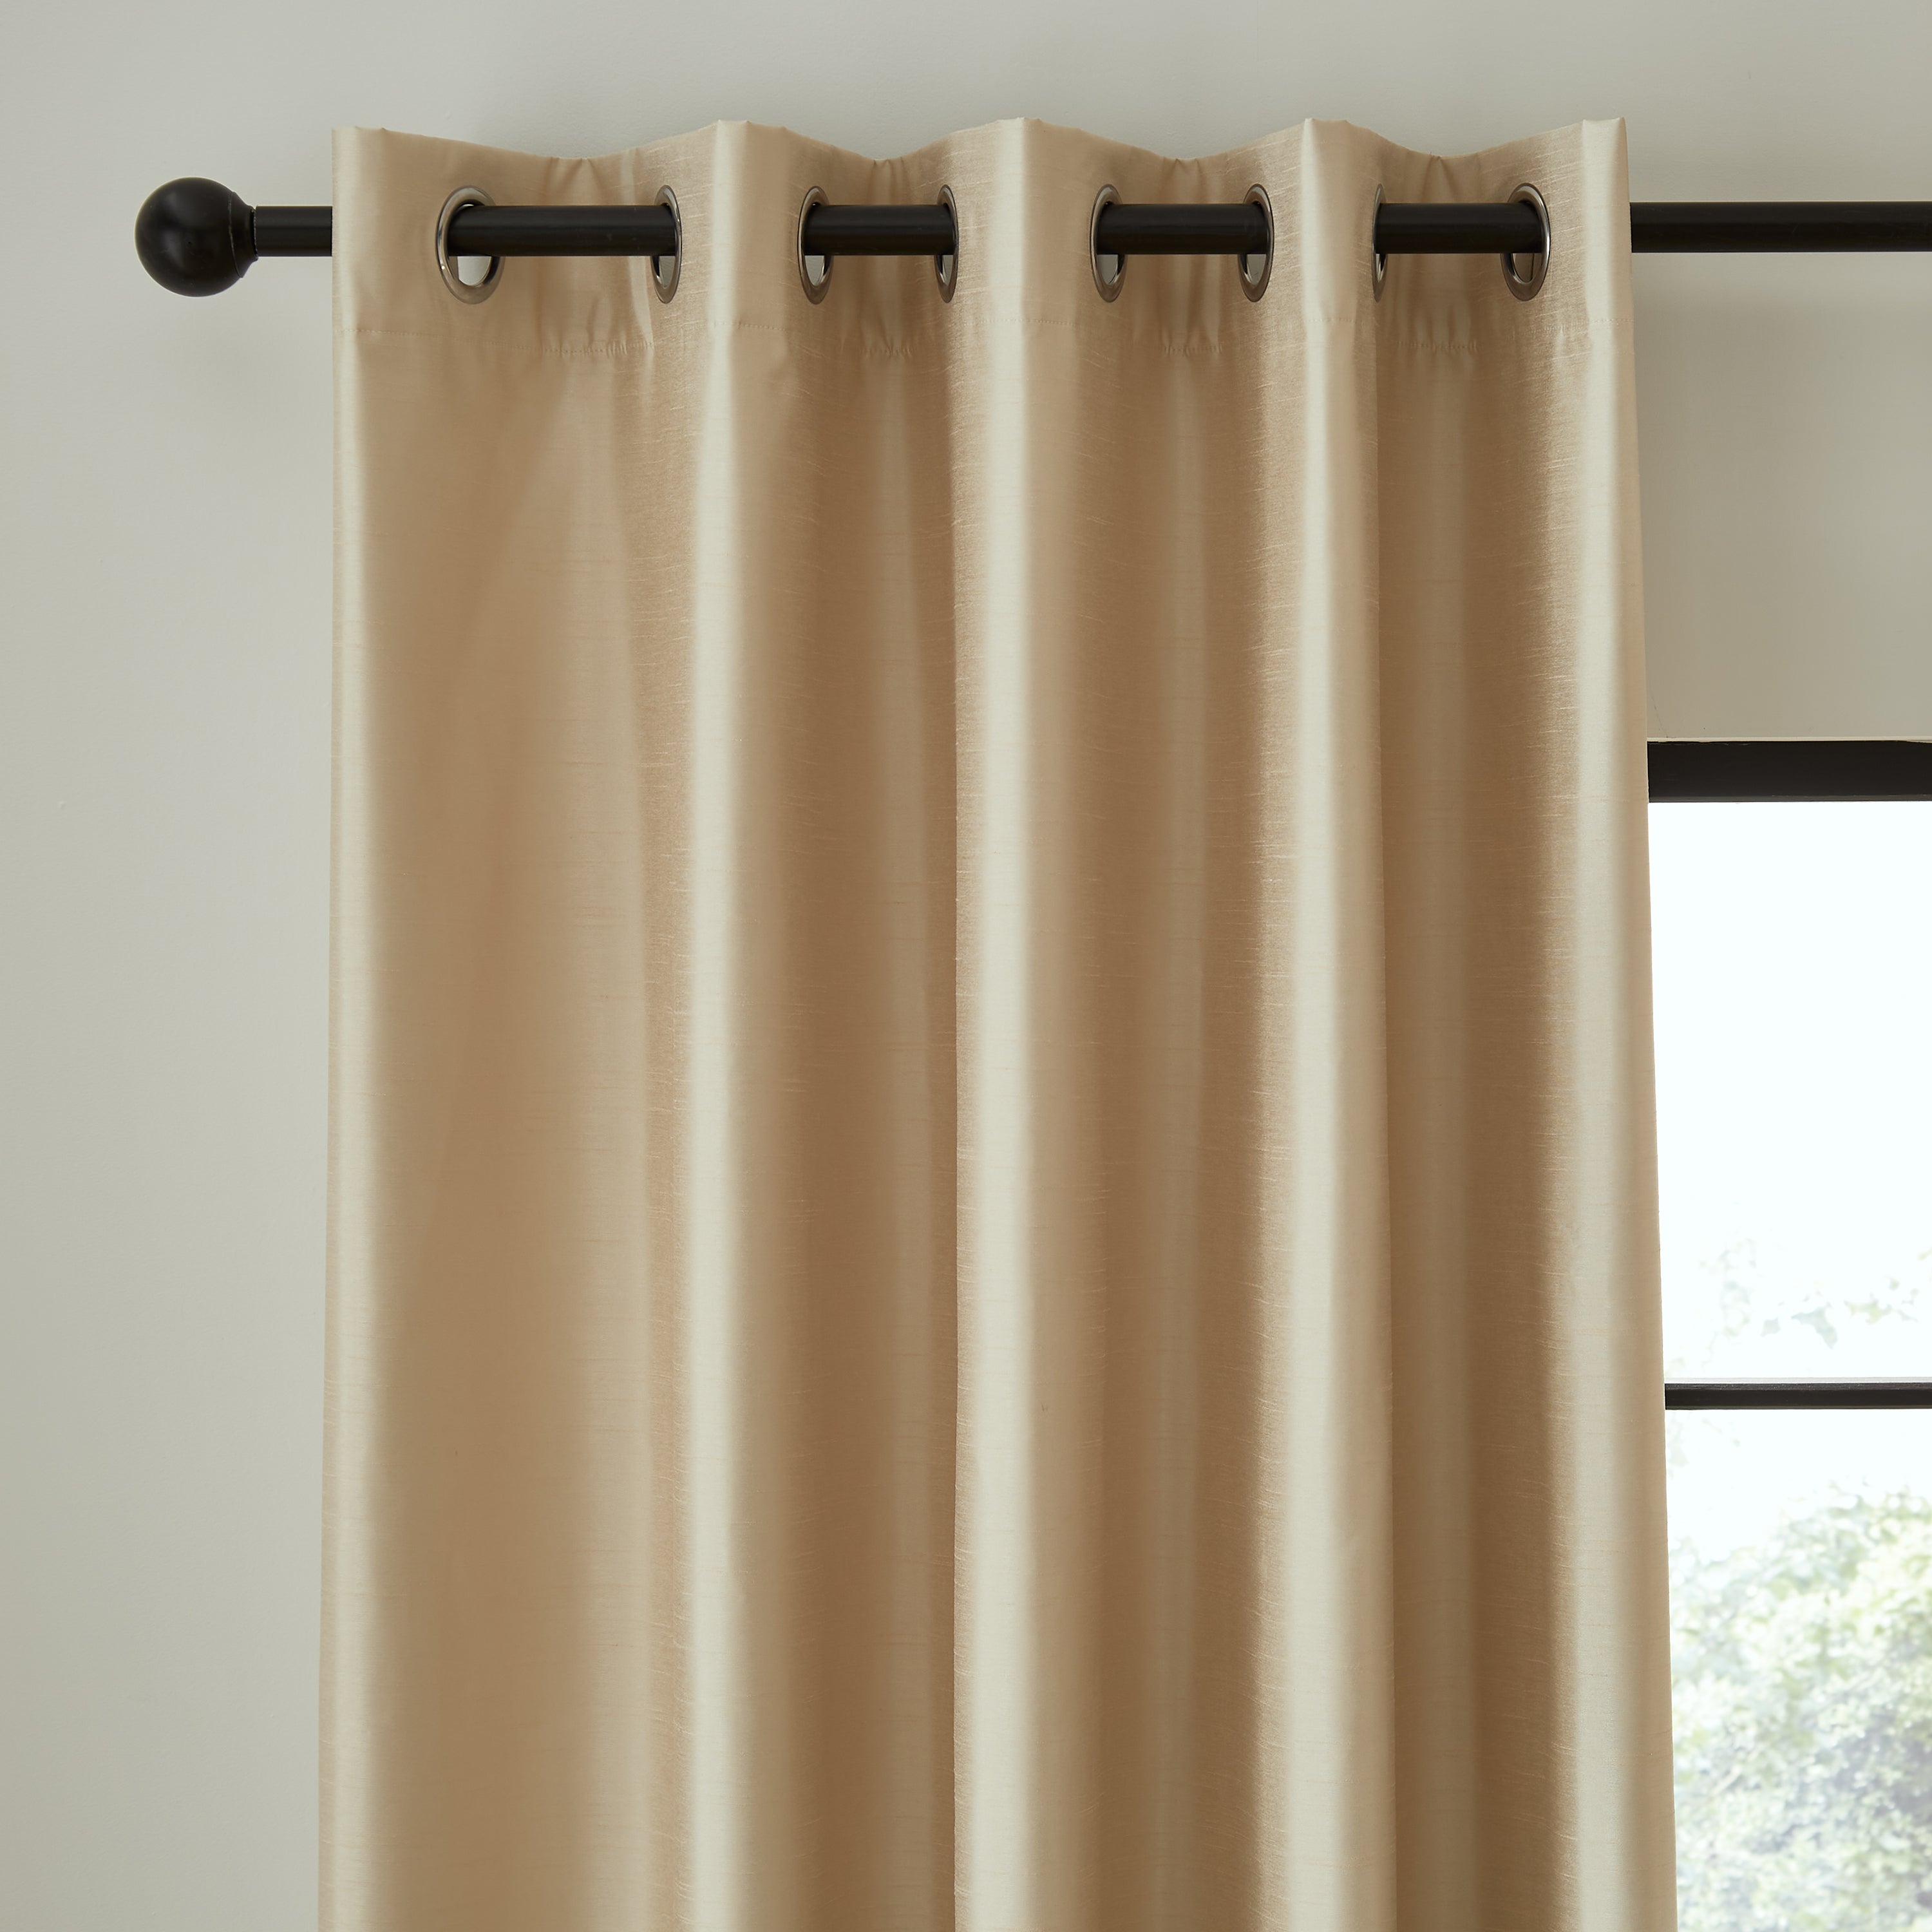 Photos - Curtains & Drapes Catherine Lansfield Faux Silk Blackout Thermal Eyelet Curtains Champagne 